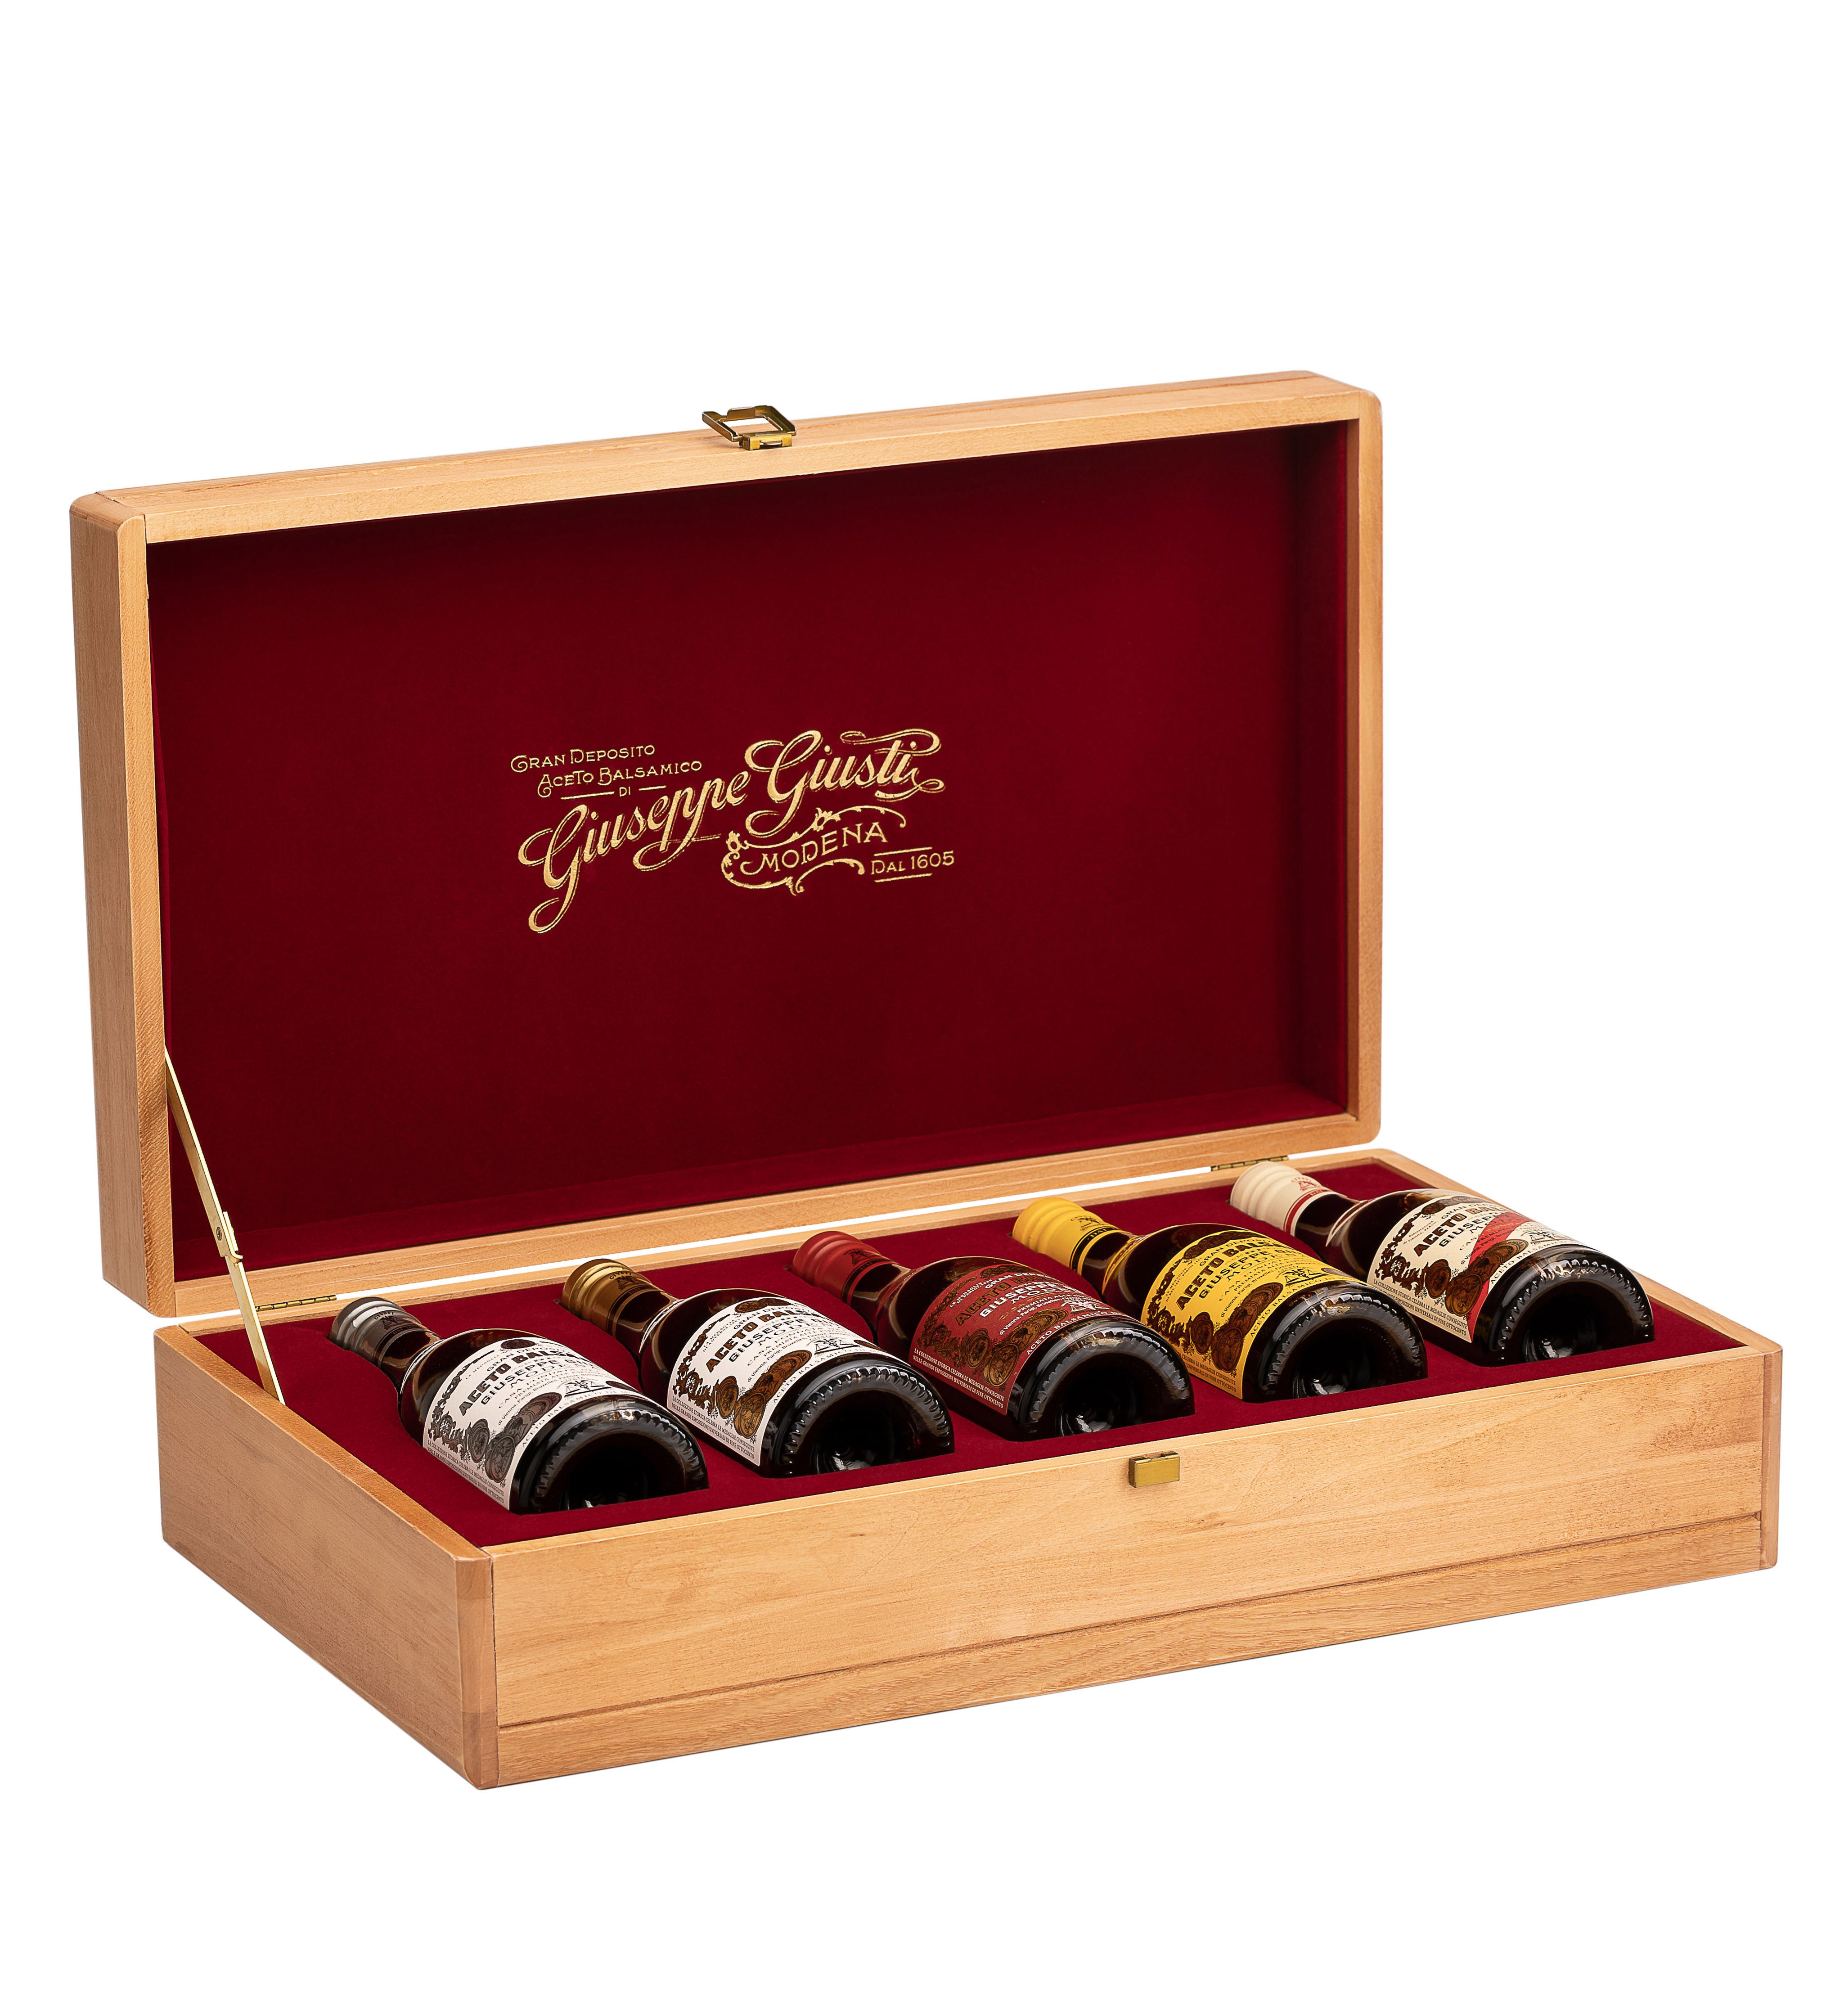 Giusti IGP Historical Balsamic Vinegar Collection with Wooden Box